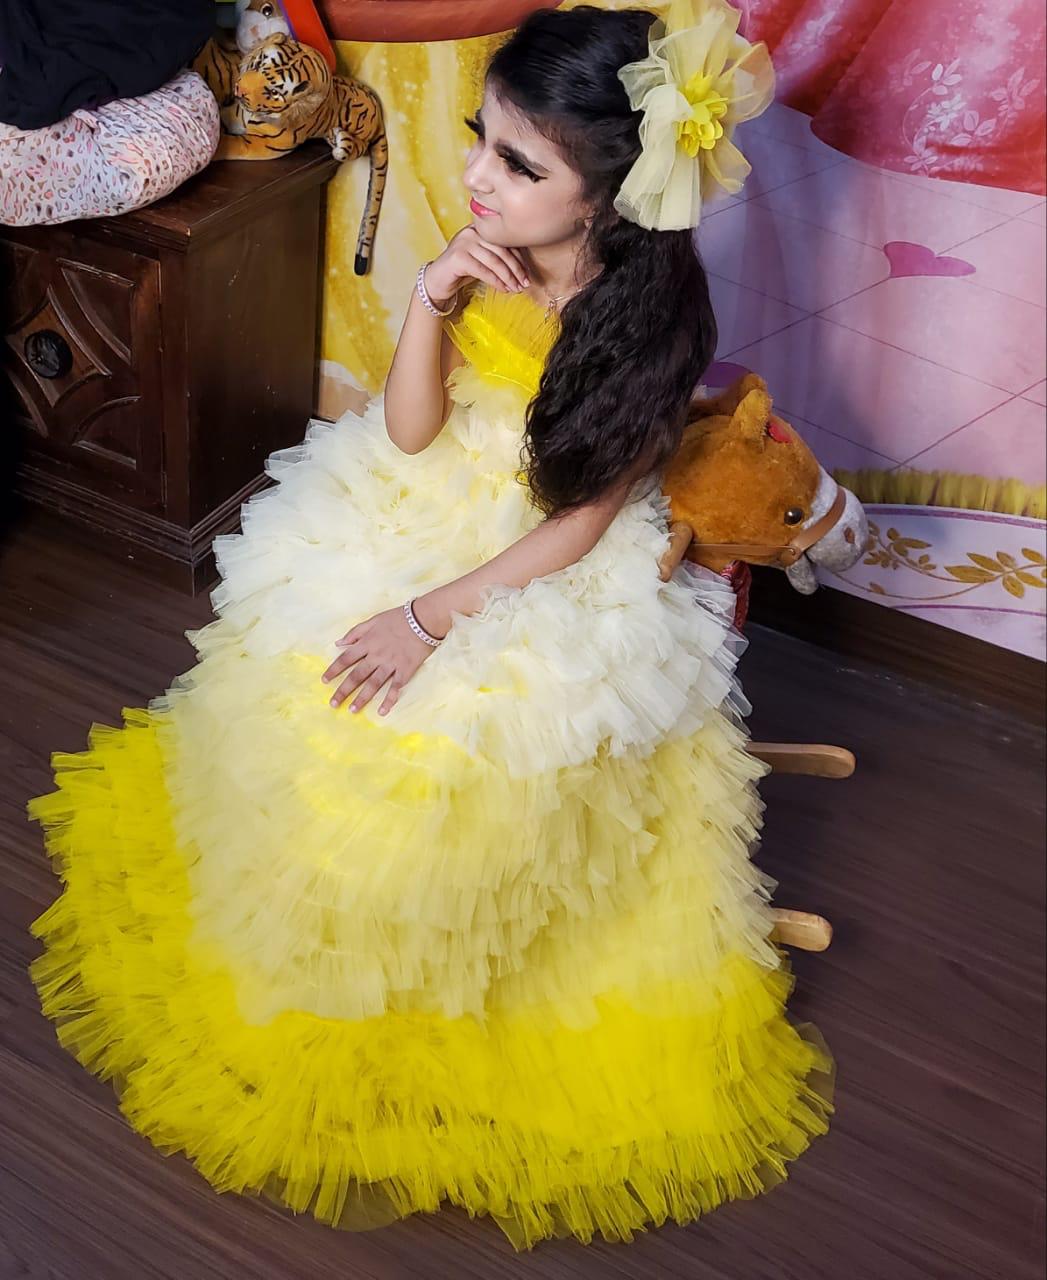 Mustard Yellow Designer Wear Gown For party|Shop Online | Gown party wear,  Latest gown designs, Long dress fashion